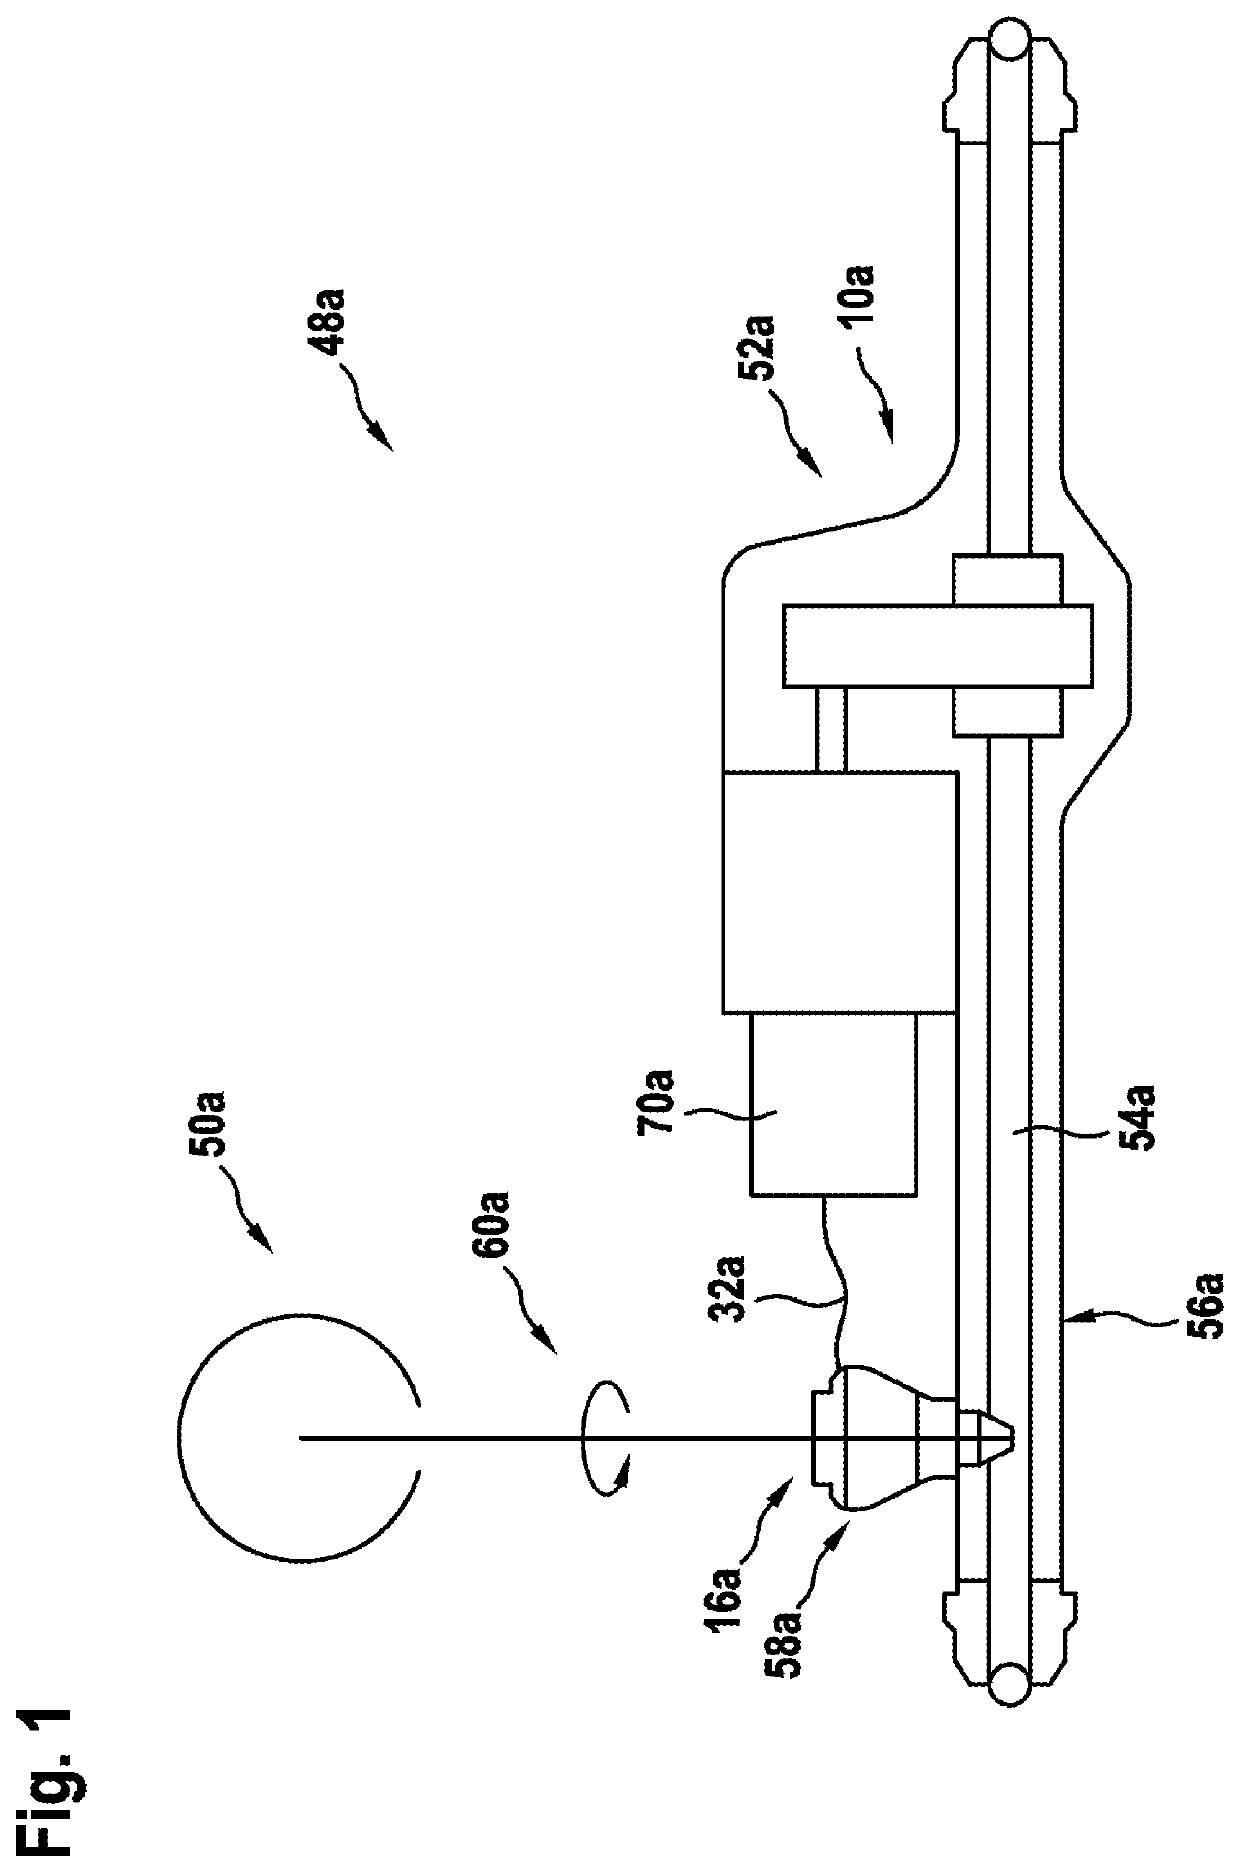 Steering Device having a Connector Unit for Making Electrical Contact with a Steering Sensor Unit